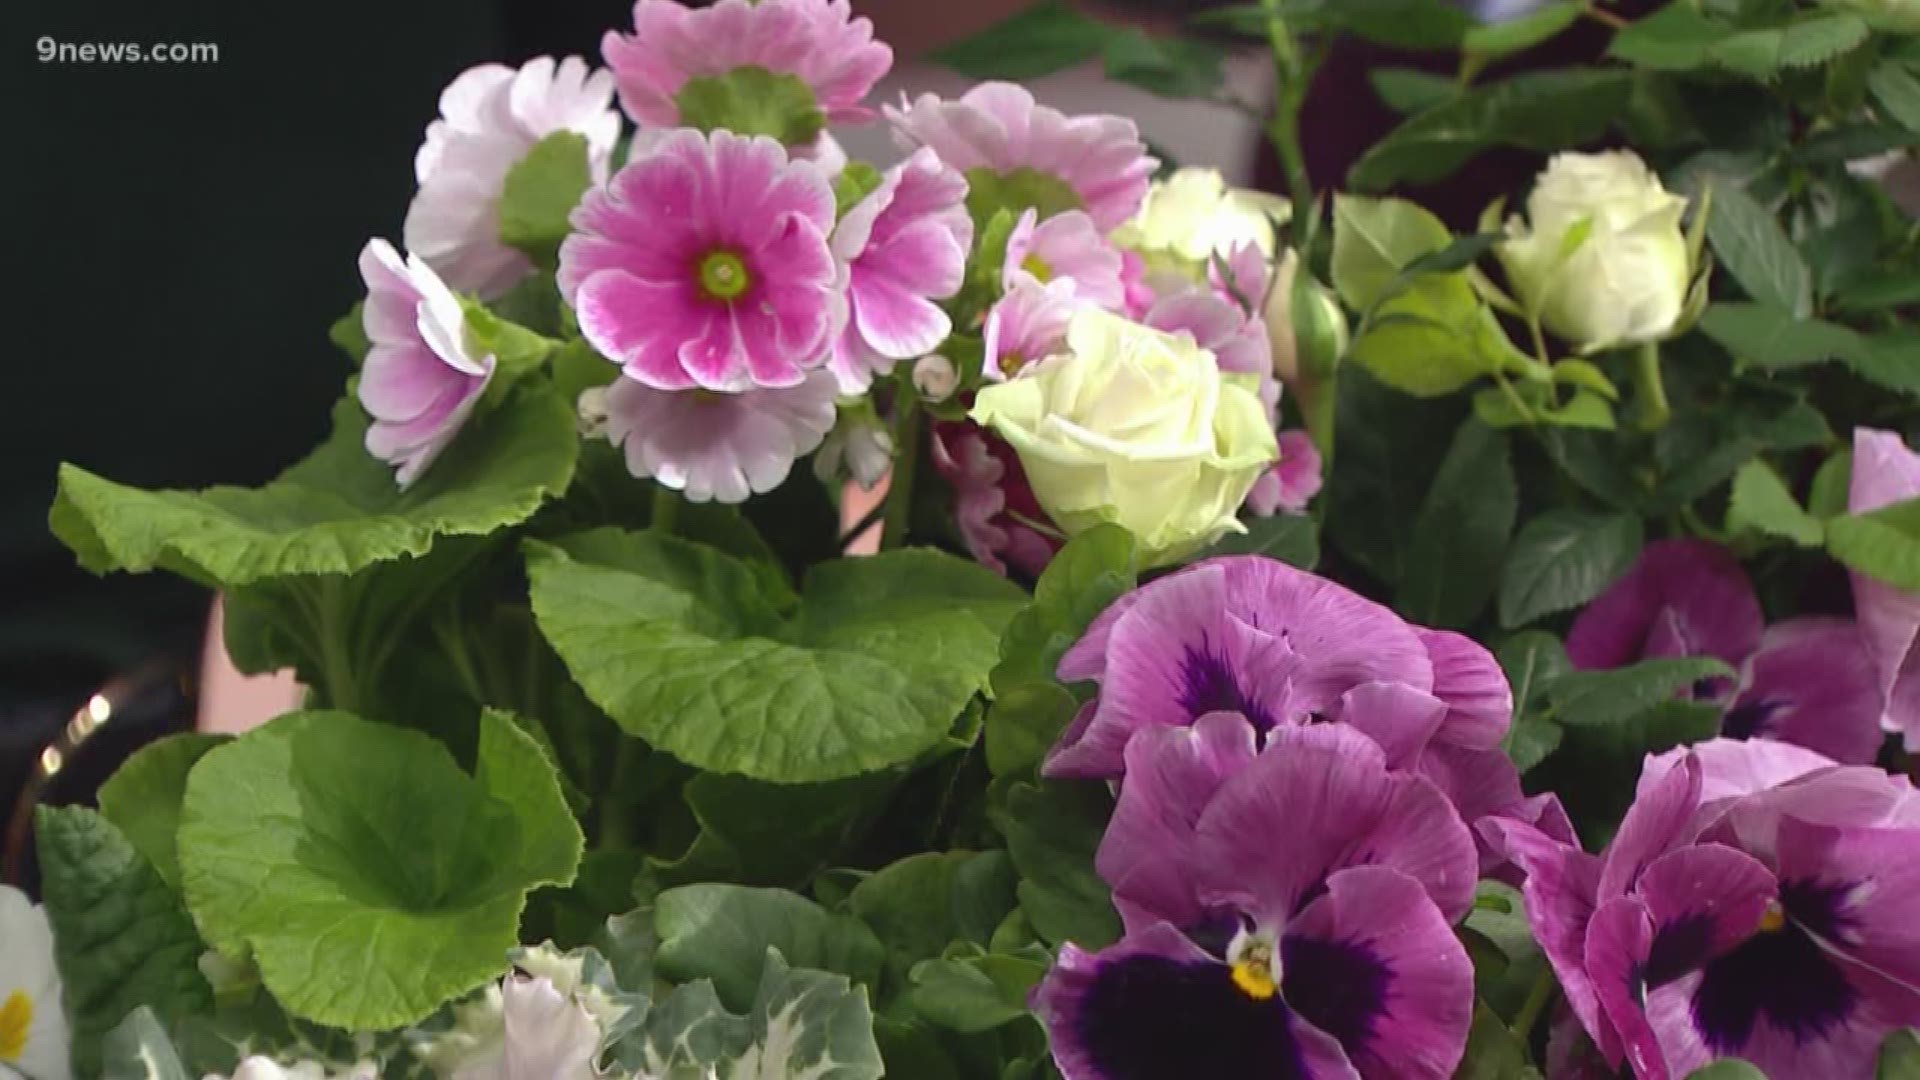 Garden expert Rob Procter introduces some plants you can buy ahead of Spring